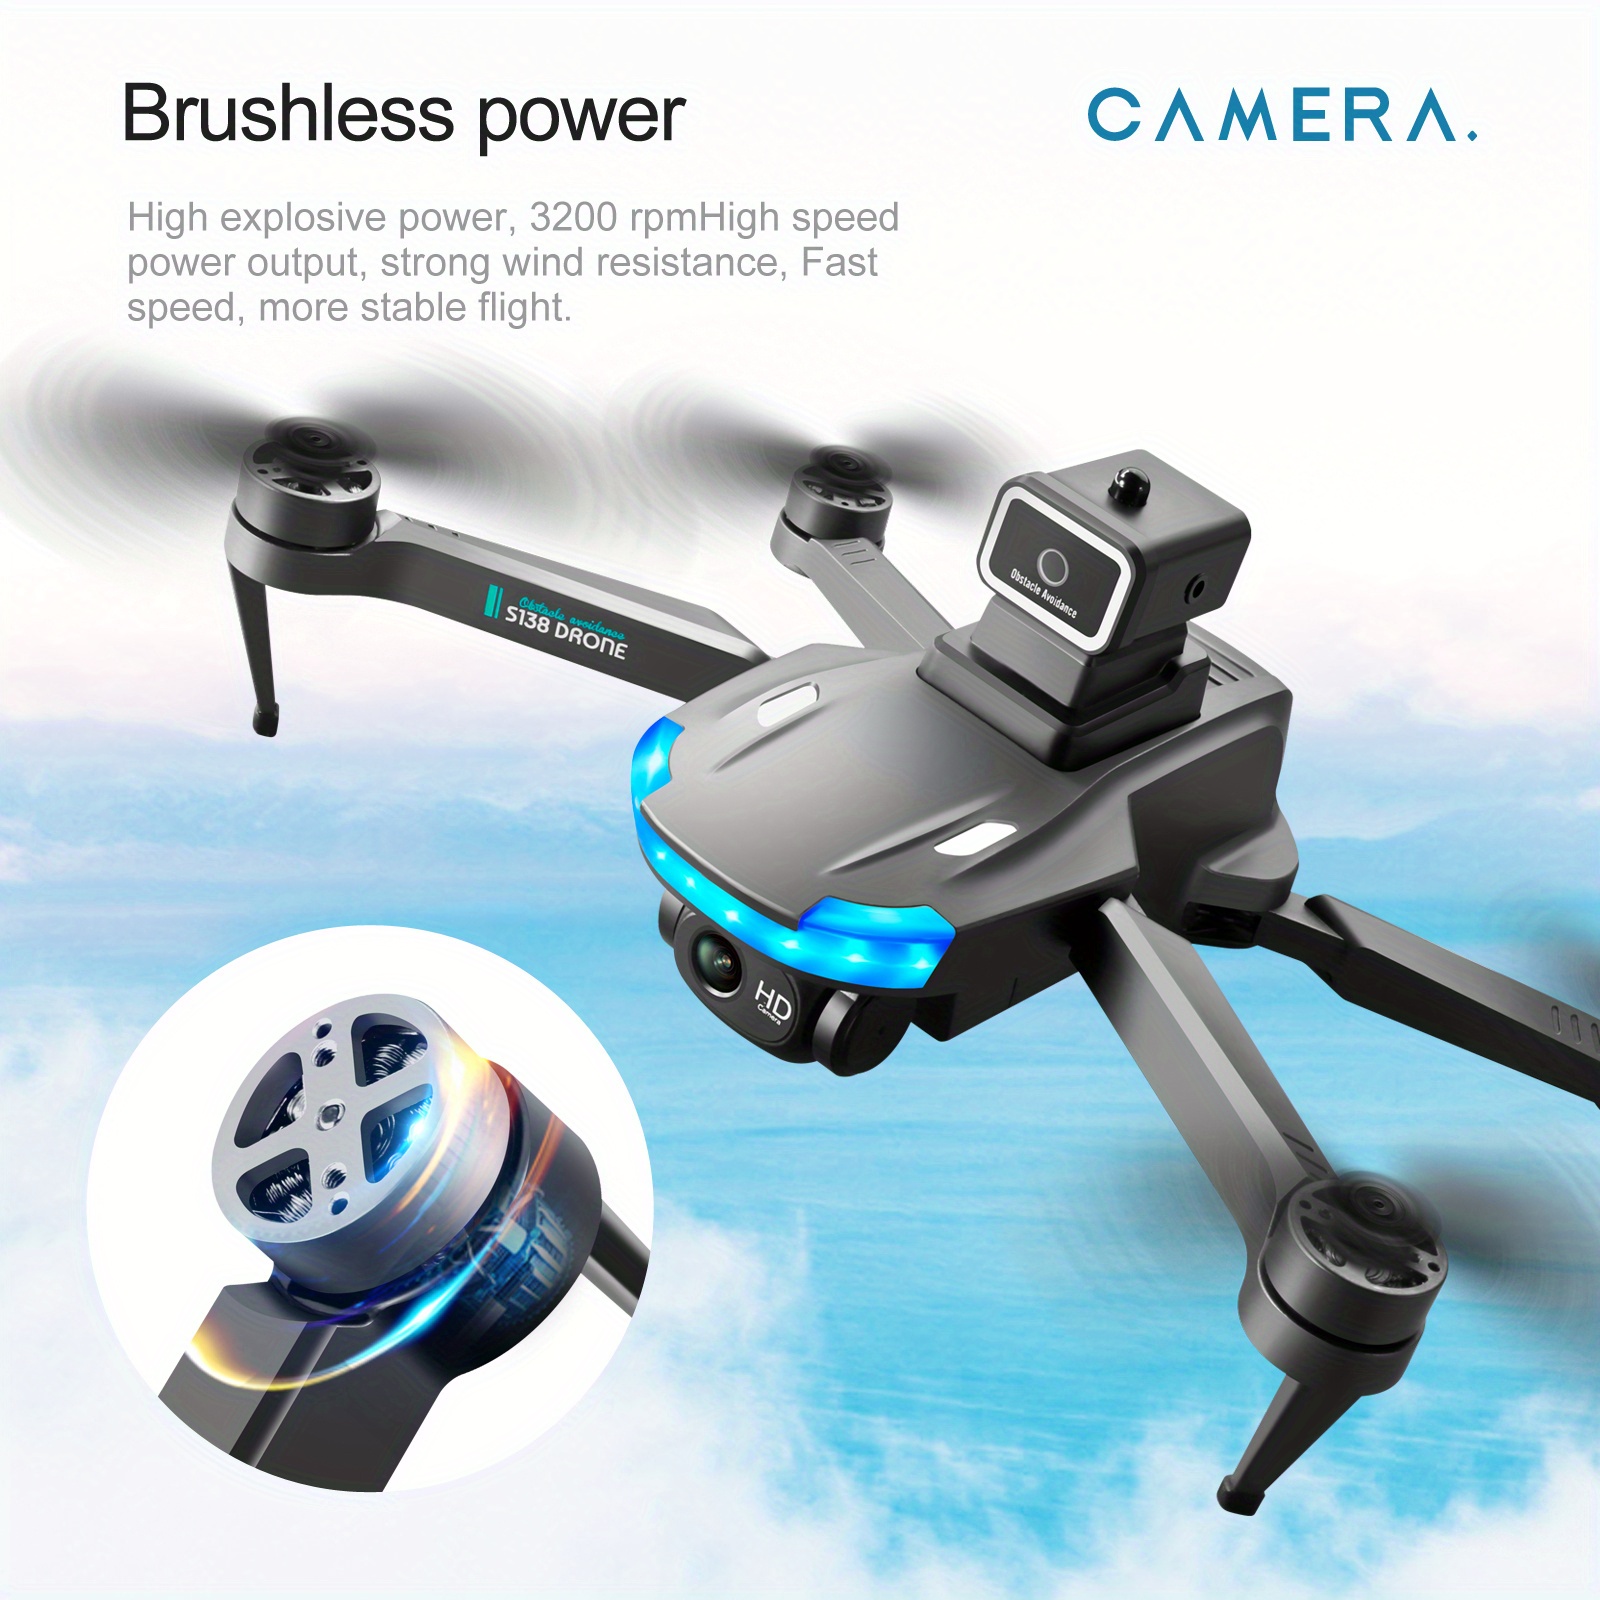 s138 brushless optical flow remote control drone with hd dual camera 1 3 batteries optical flow positioning esc camera brushless motor headless mode 360 intelligent obstacle avoidance wifi fpv details 2